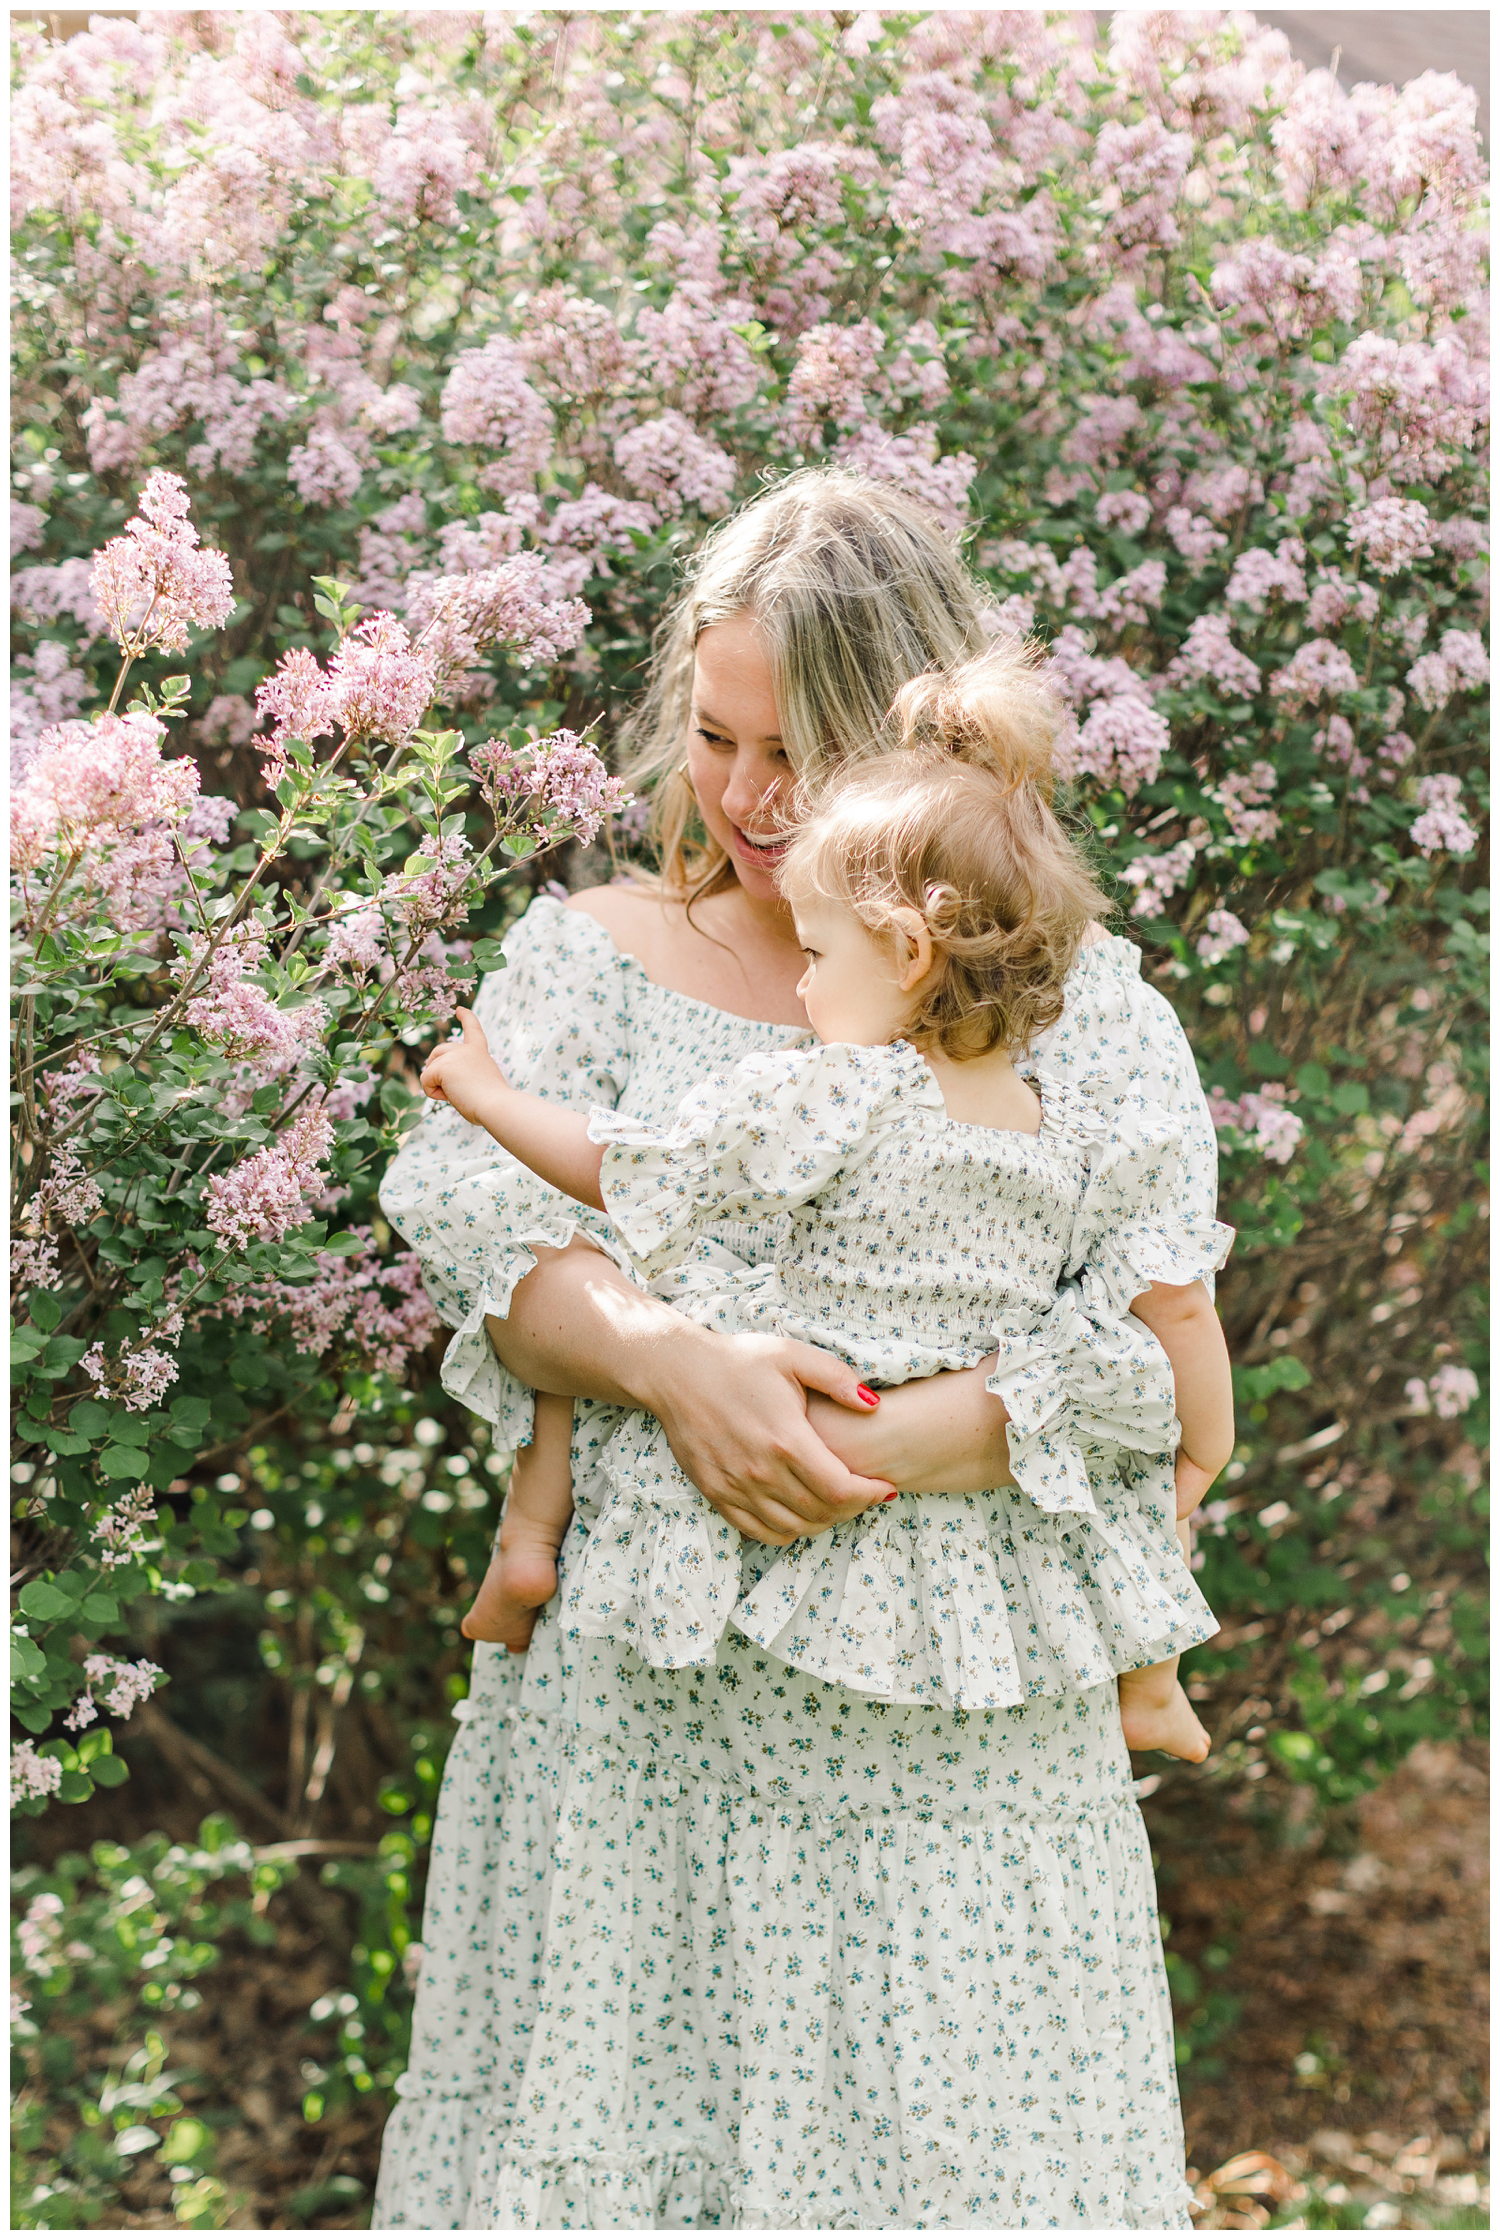 Abby snuggles her little girl near a lilac bush in the soft morning light, both wearing matching Ivy City Co dresses | CB Studio